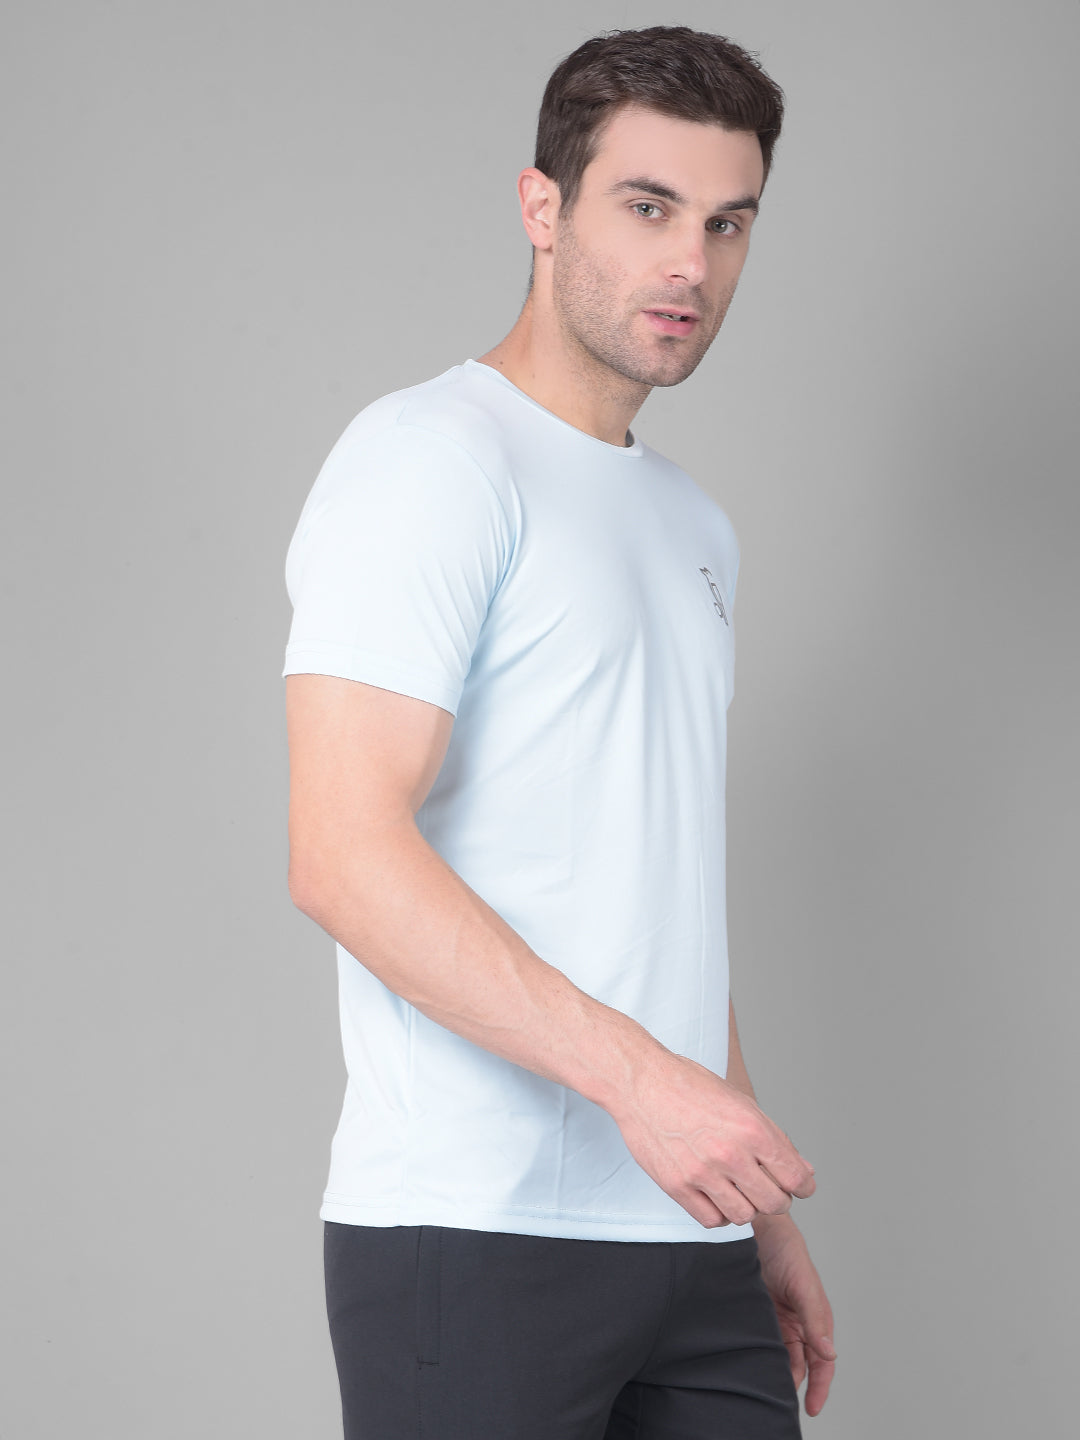 Sky Blue Serenity Kookaburra's Round Neck T-Shirt for a Fresh and Vibrant Look